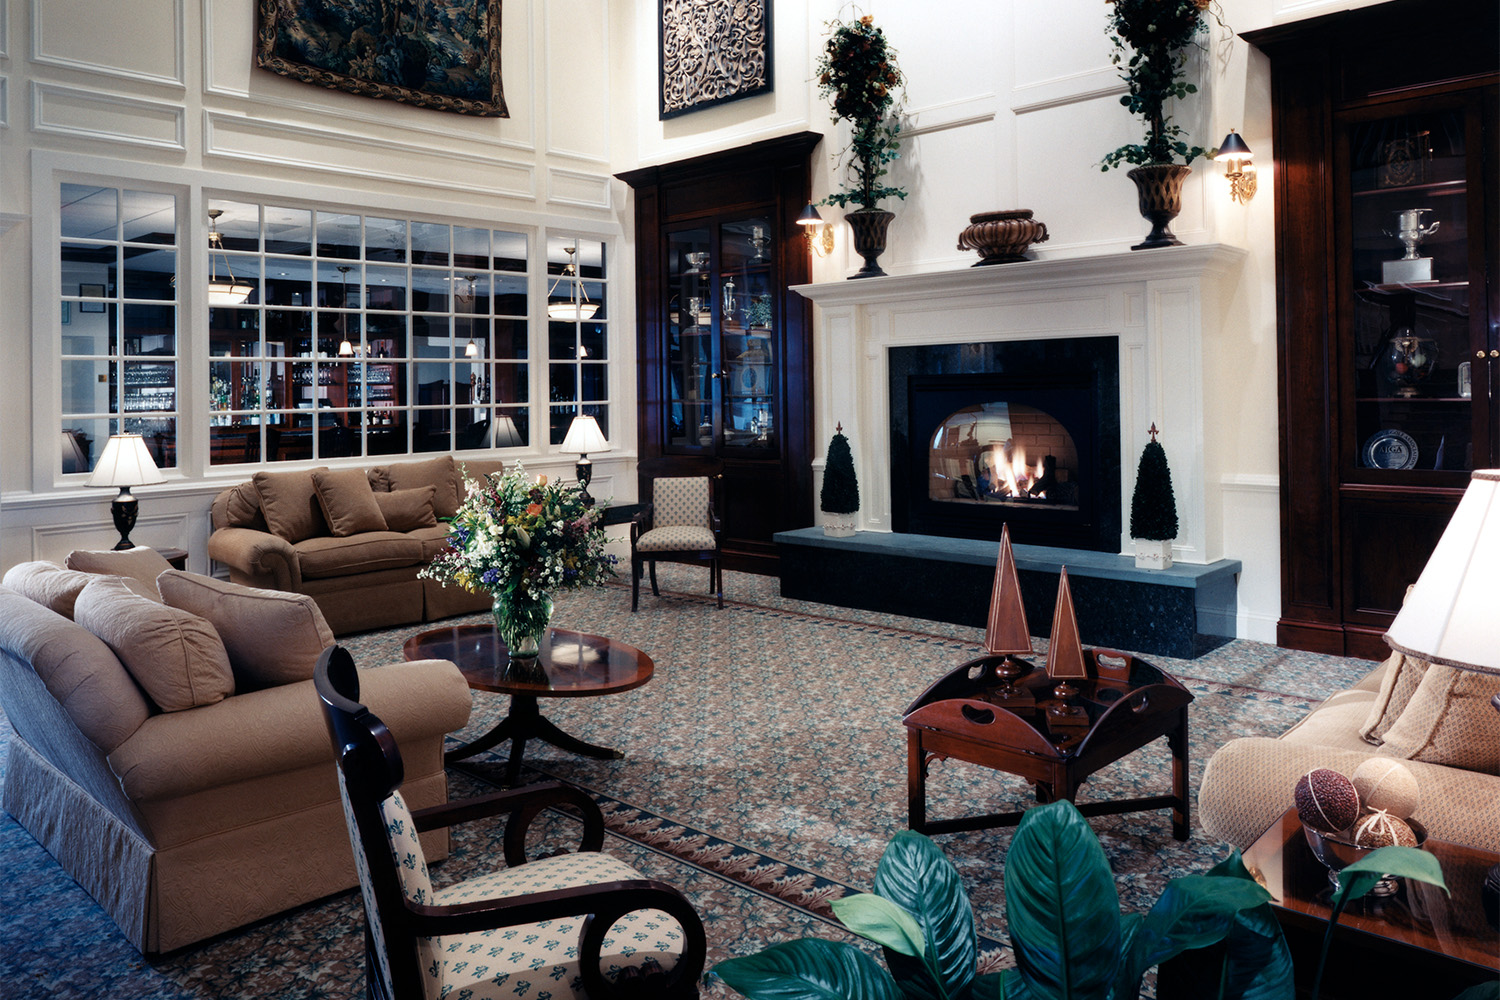 lounge area of clubhouse with several windows, and a fireplace in the center 